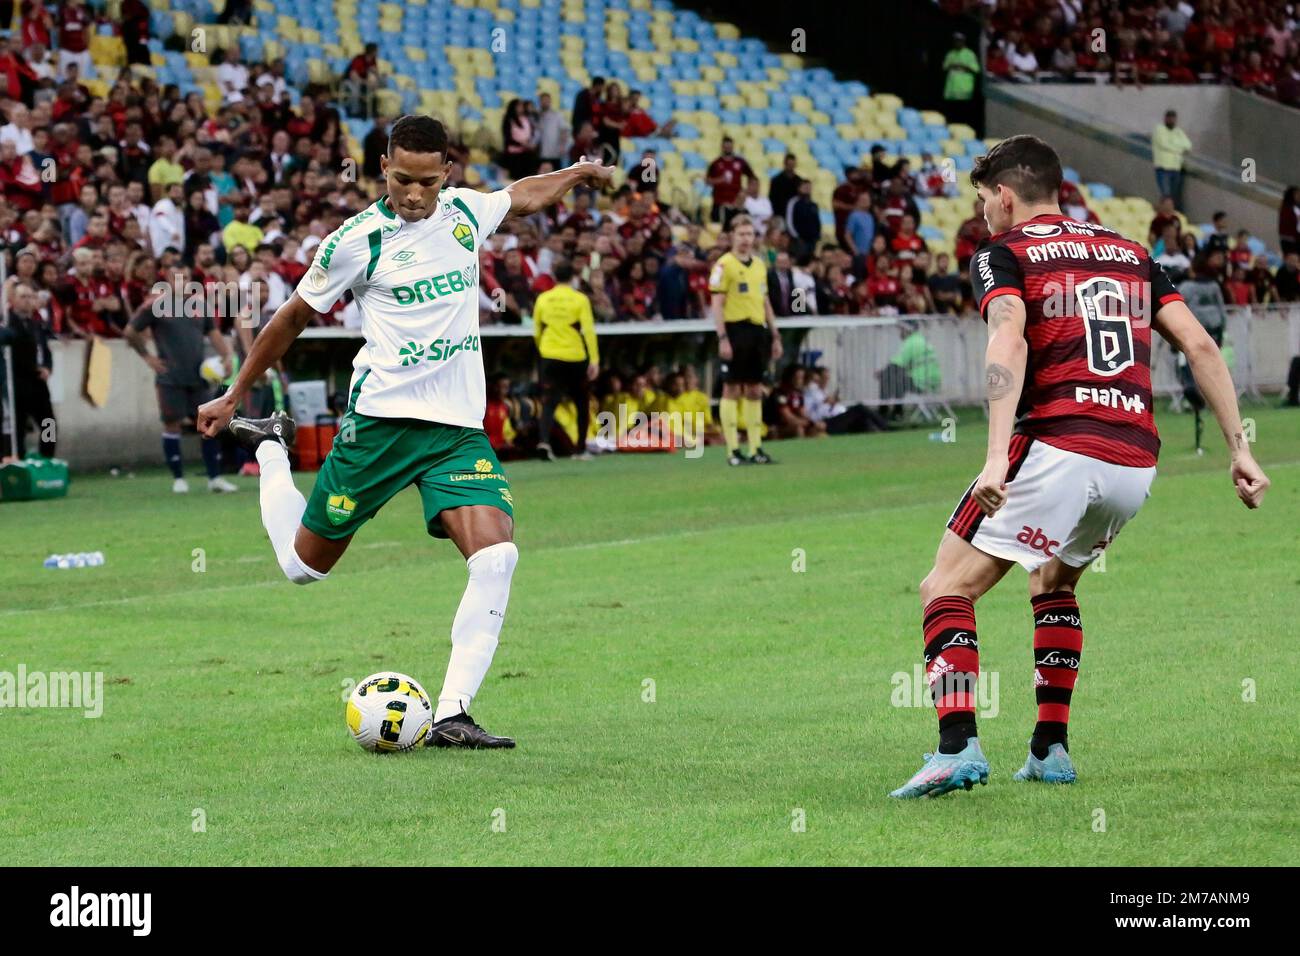 Rio de Janeiro, Brazil,June 15, 2022. Soccer player Kevin of the cuiabá team, during the game Flamengo x Cuiabá for the Brazilian championship, in the Stock Photo